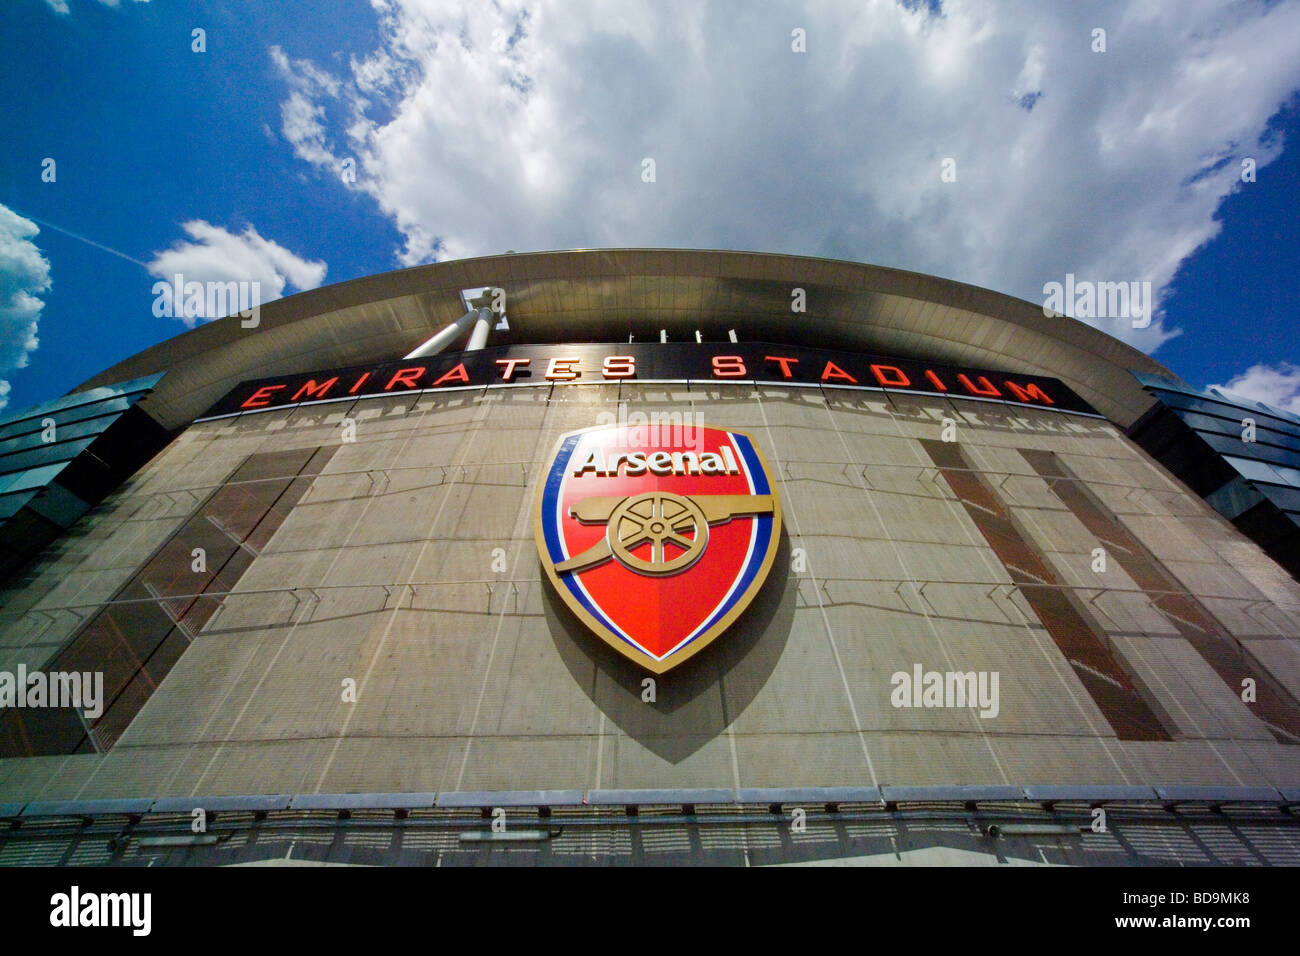 Arsenal Logo High Resolution Stock Photography and Images - Alamy